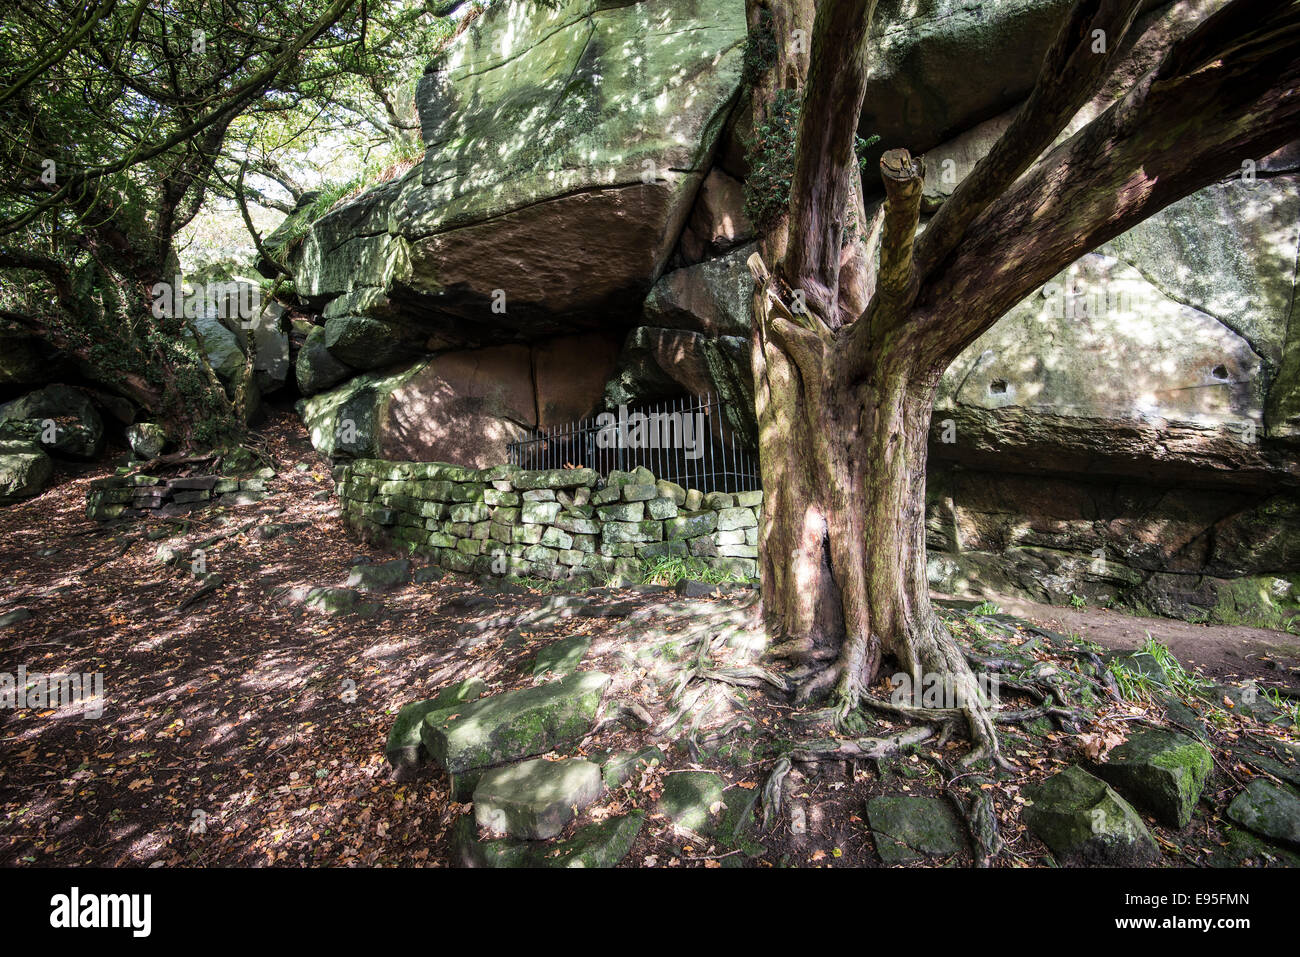 Hermits cave below Cratcliffe Tor in the Peak District. Yew tree in foreground. Stock Photo